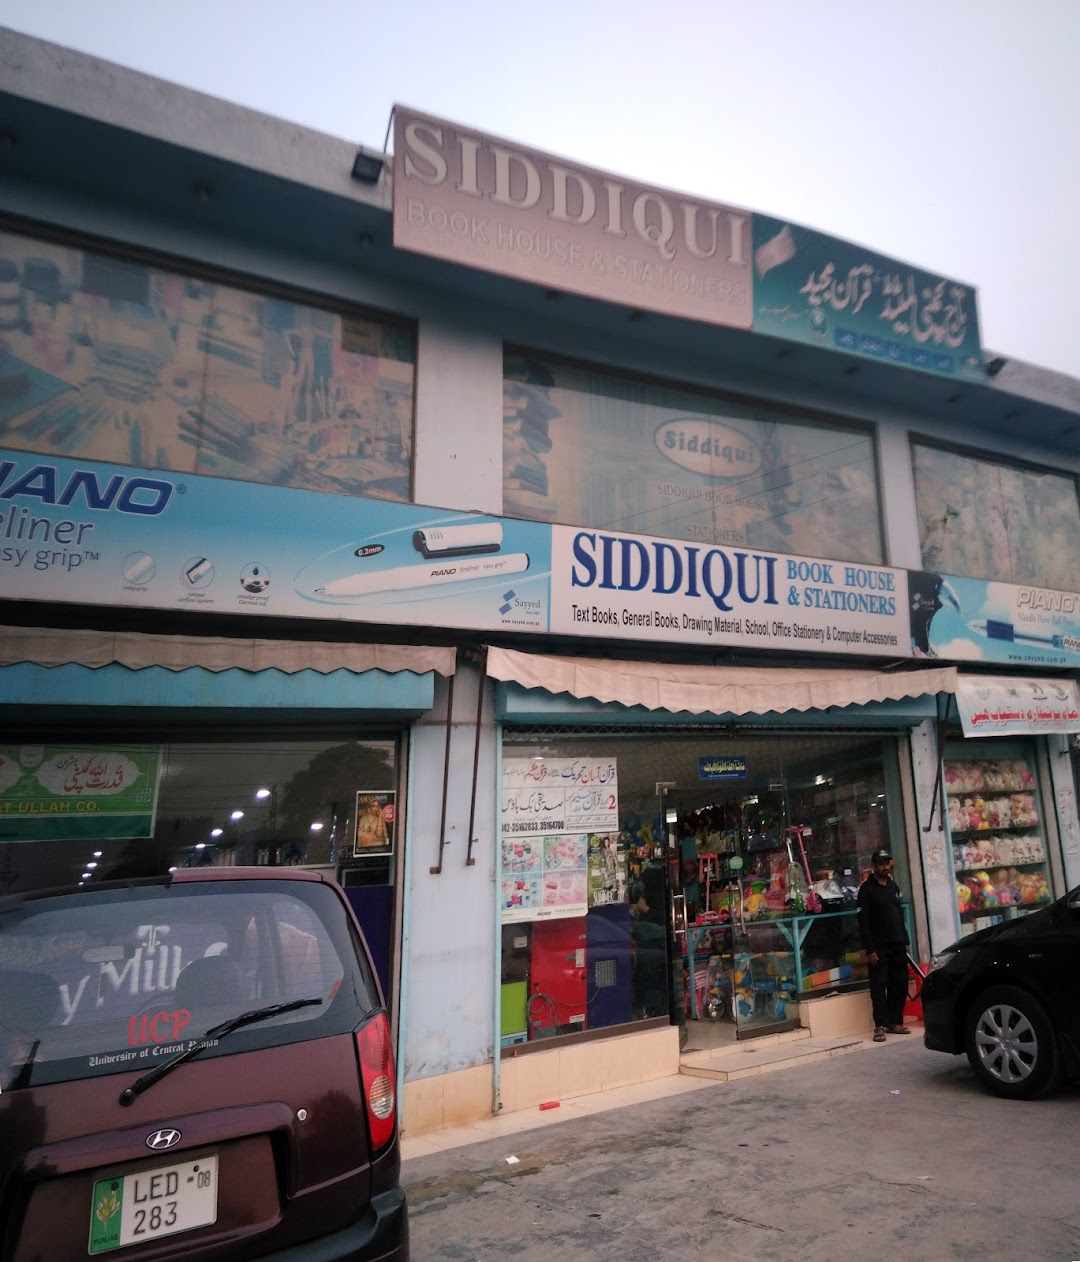 Siddiqui Book House and Stationers